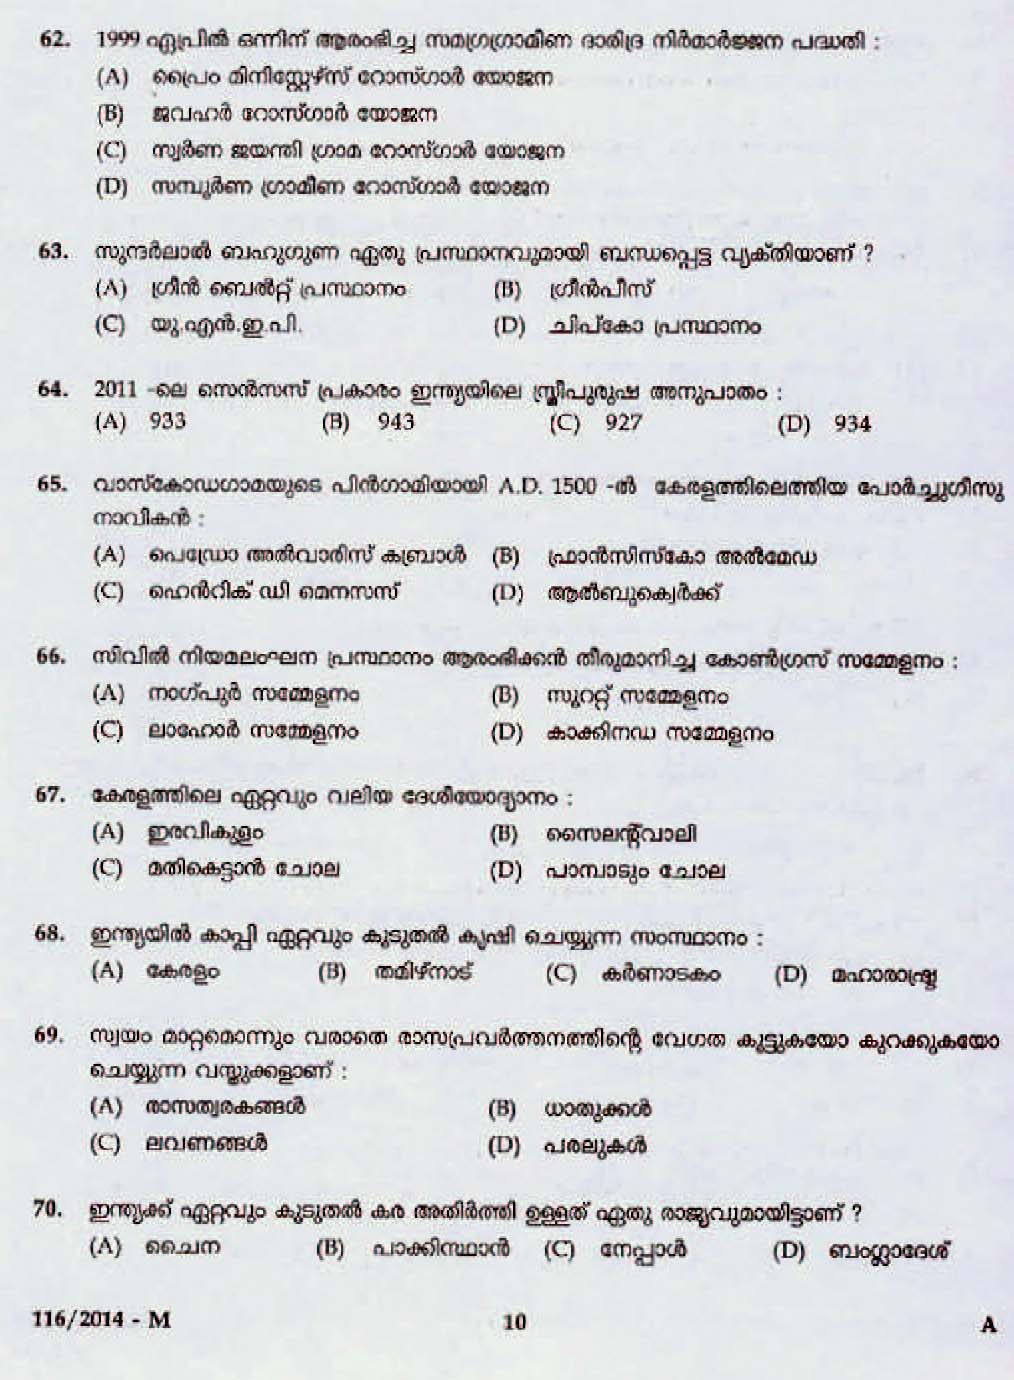 LD Clerk Various All Districts Question Paper Malayalam 2014 Paper Code 1162014 M 8